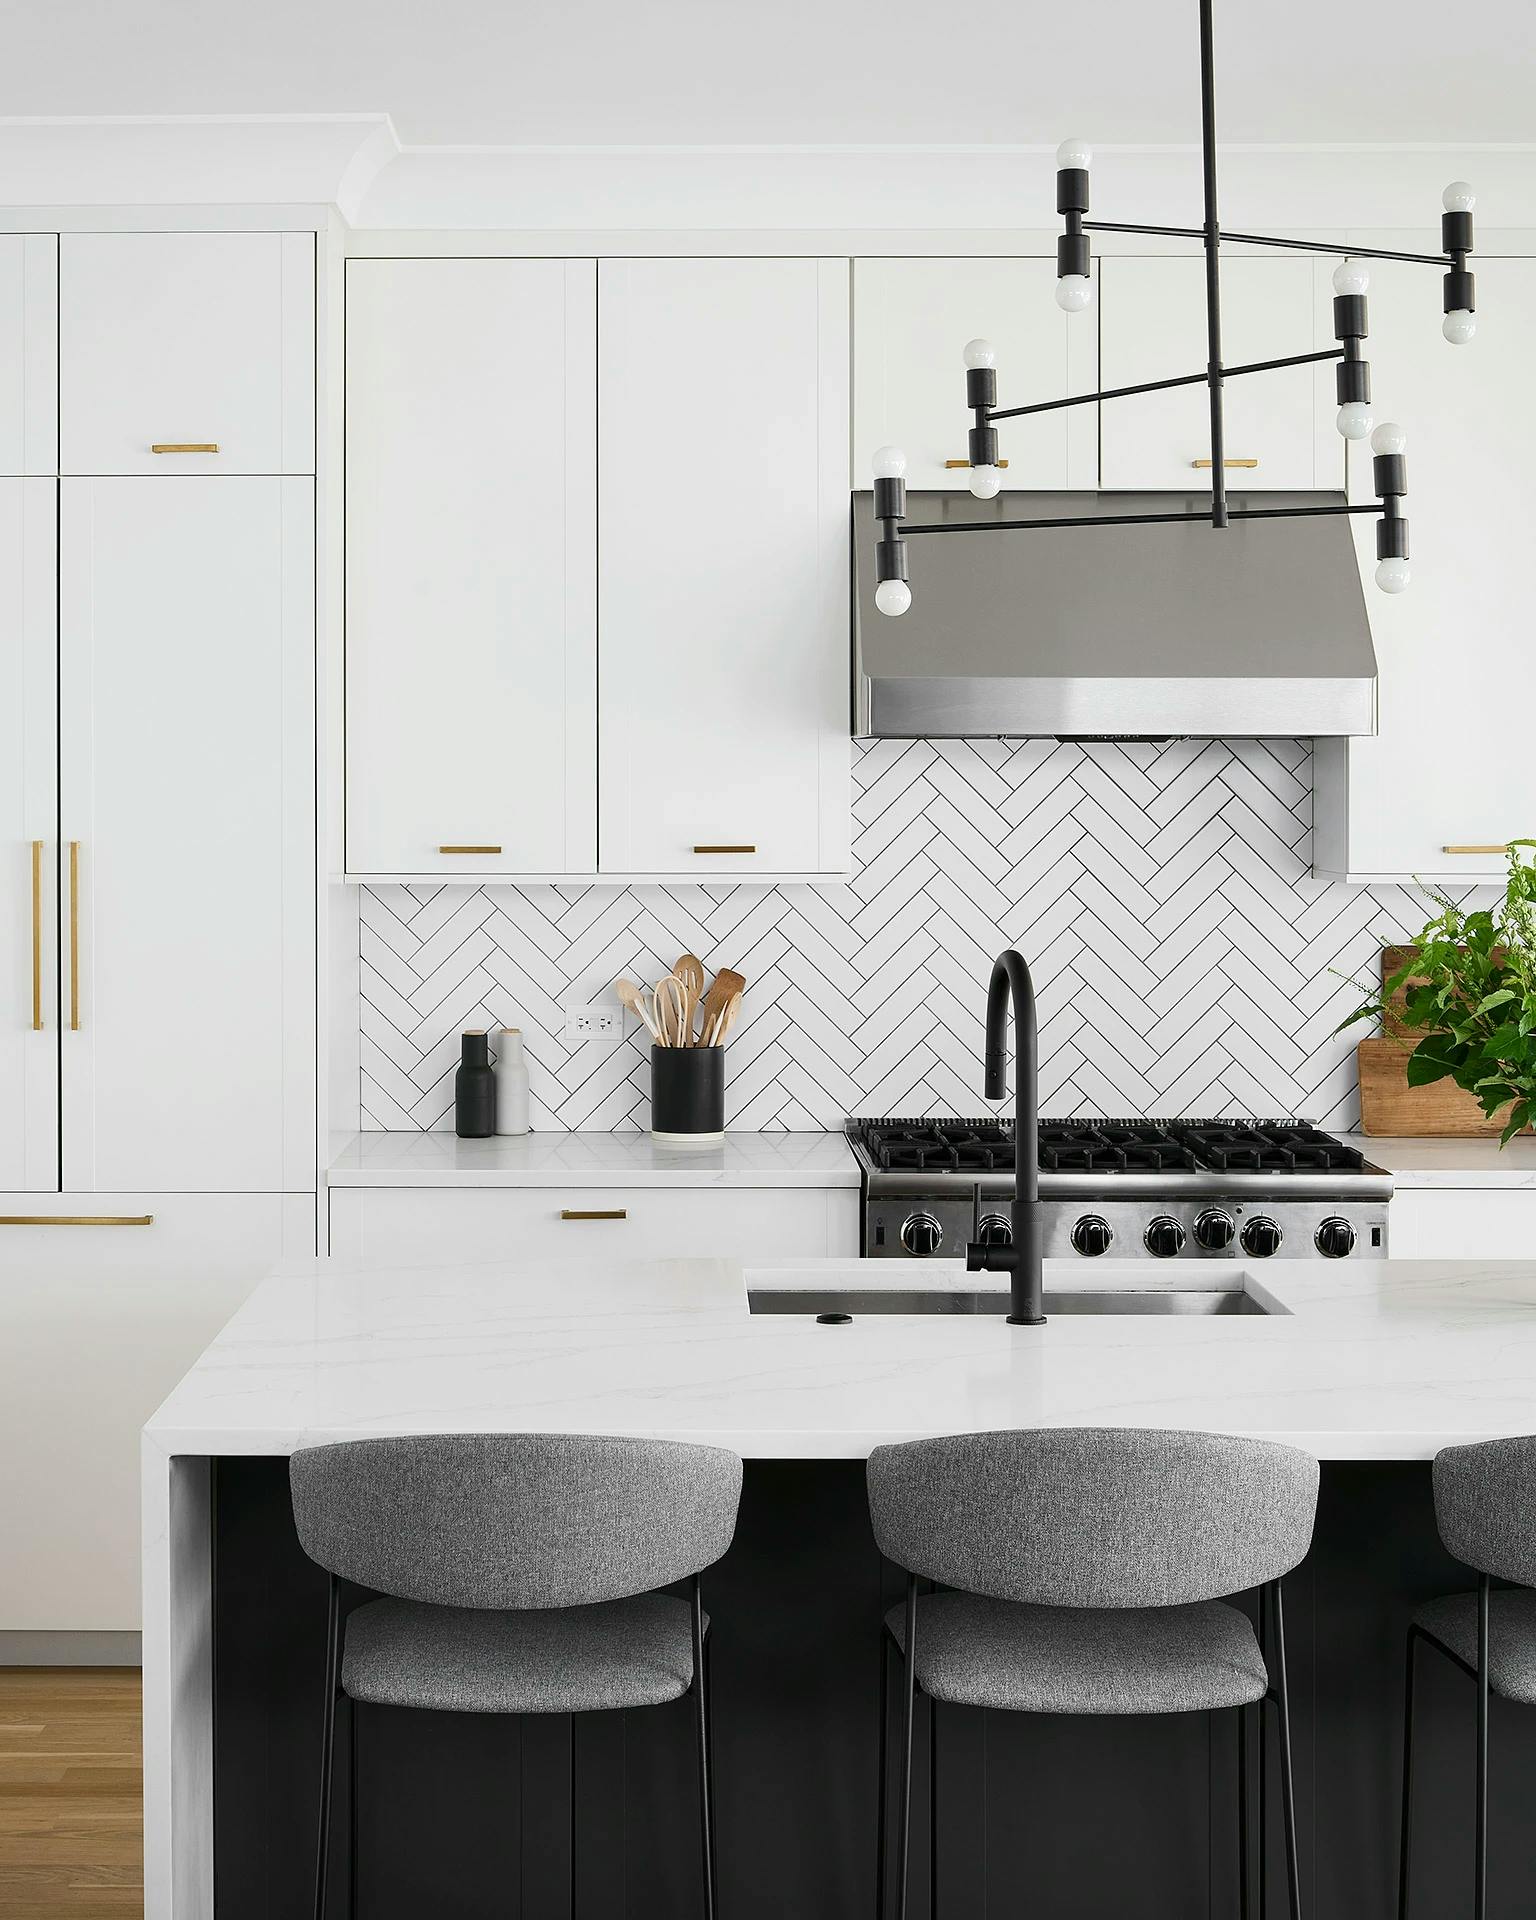 A modern kitchen with white cabinets, a white herringbone backsplash and black finishings in a Chicago apartment.